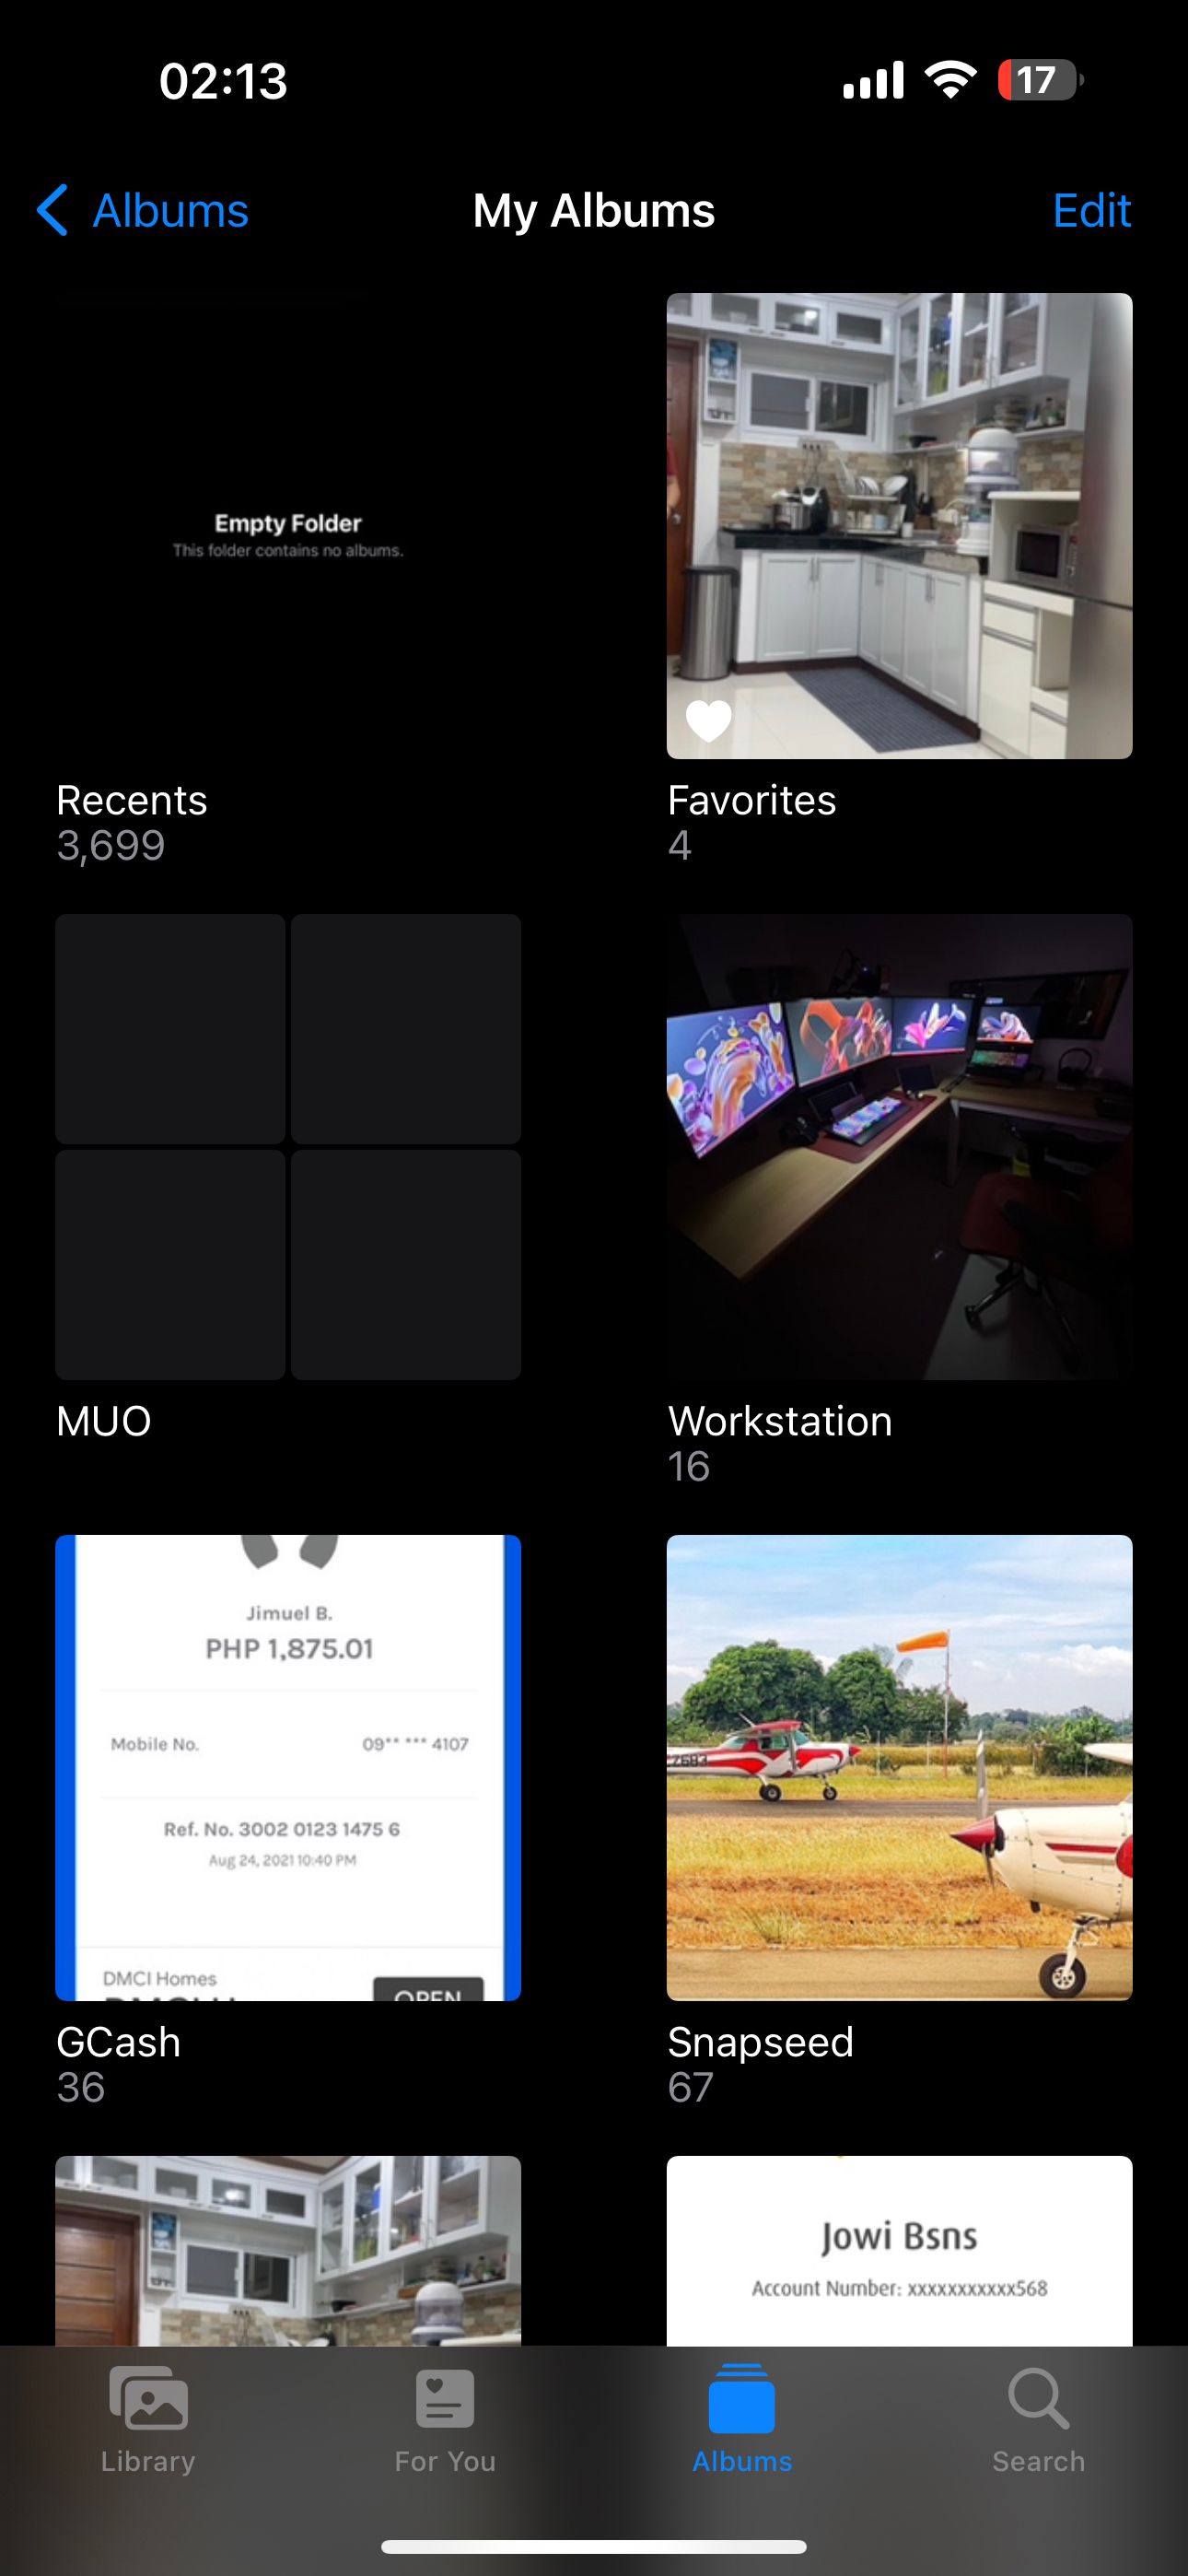 Organize iPhone Photos With the Album View